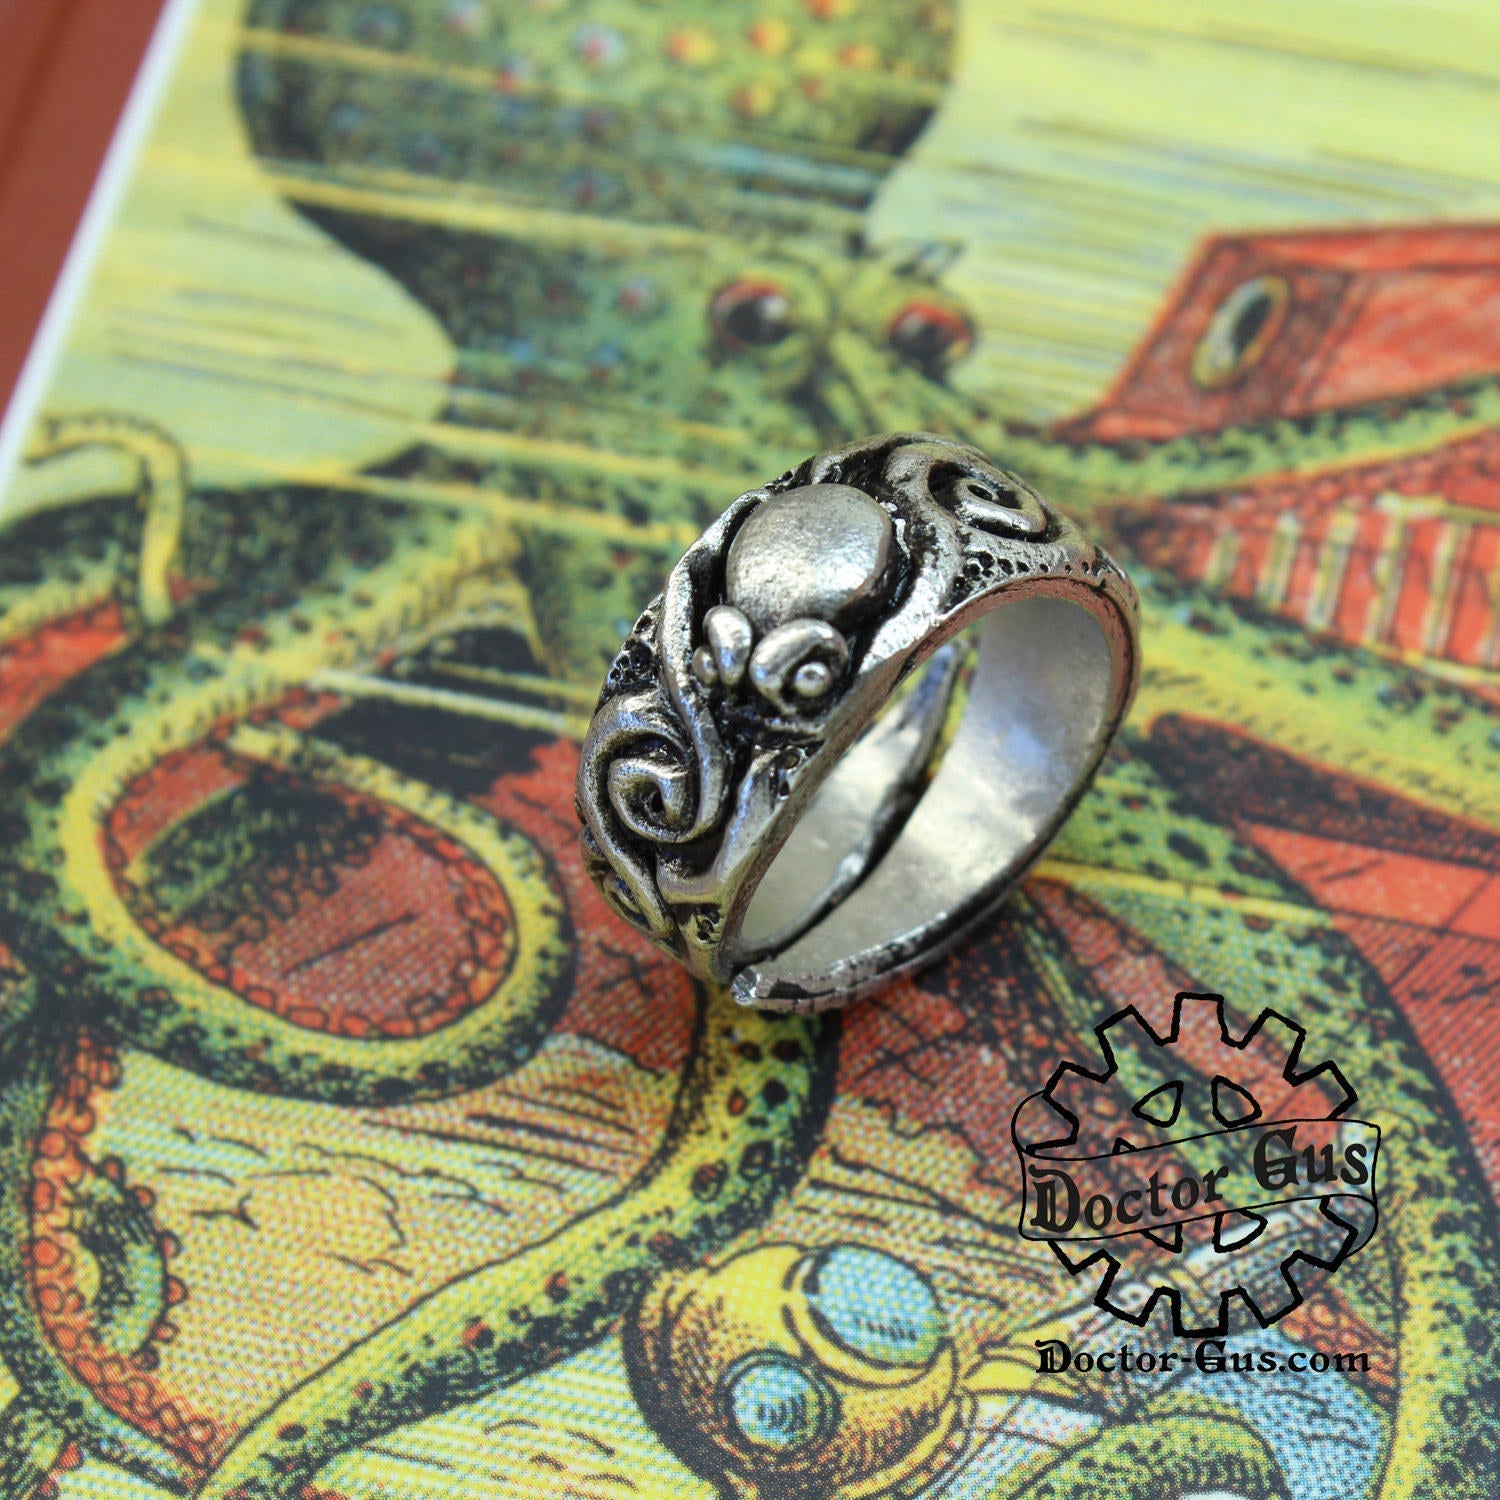 Octopus Band Ring